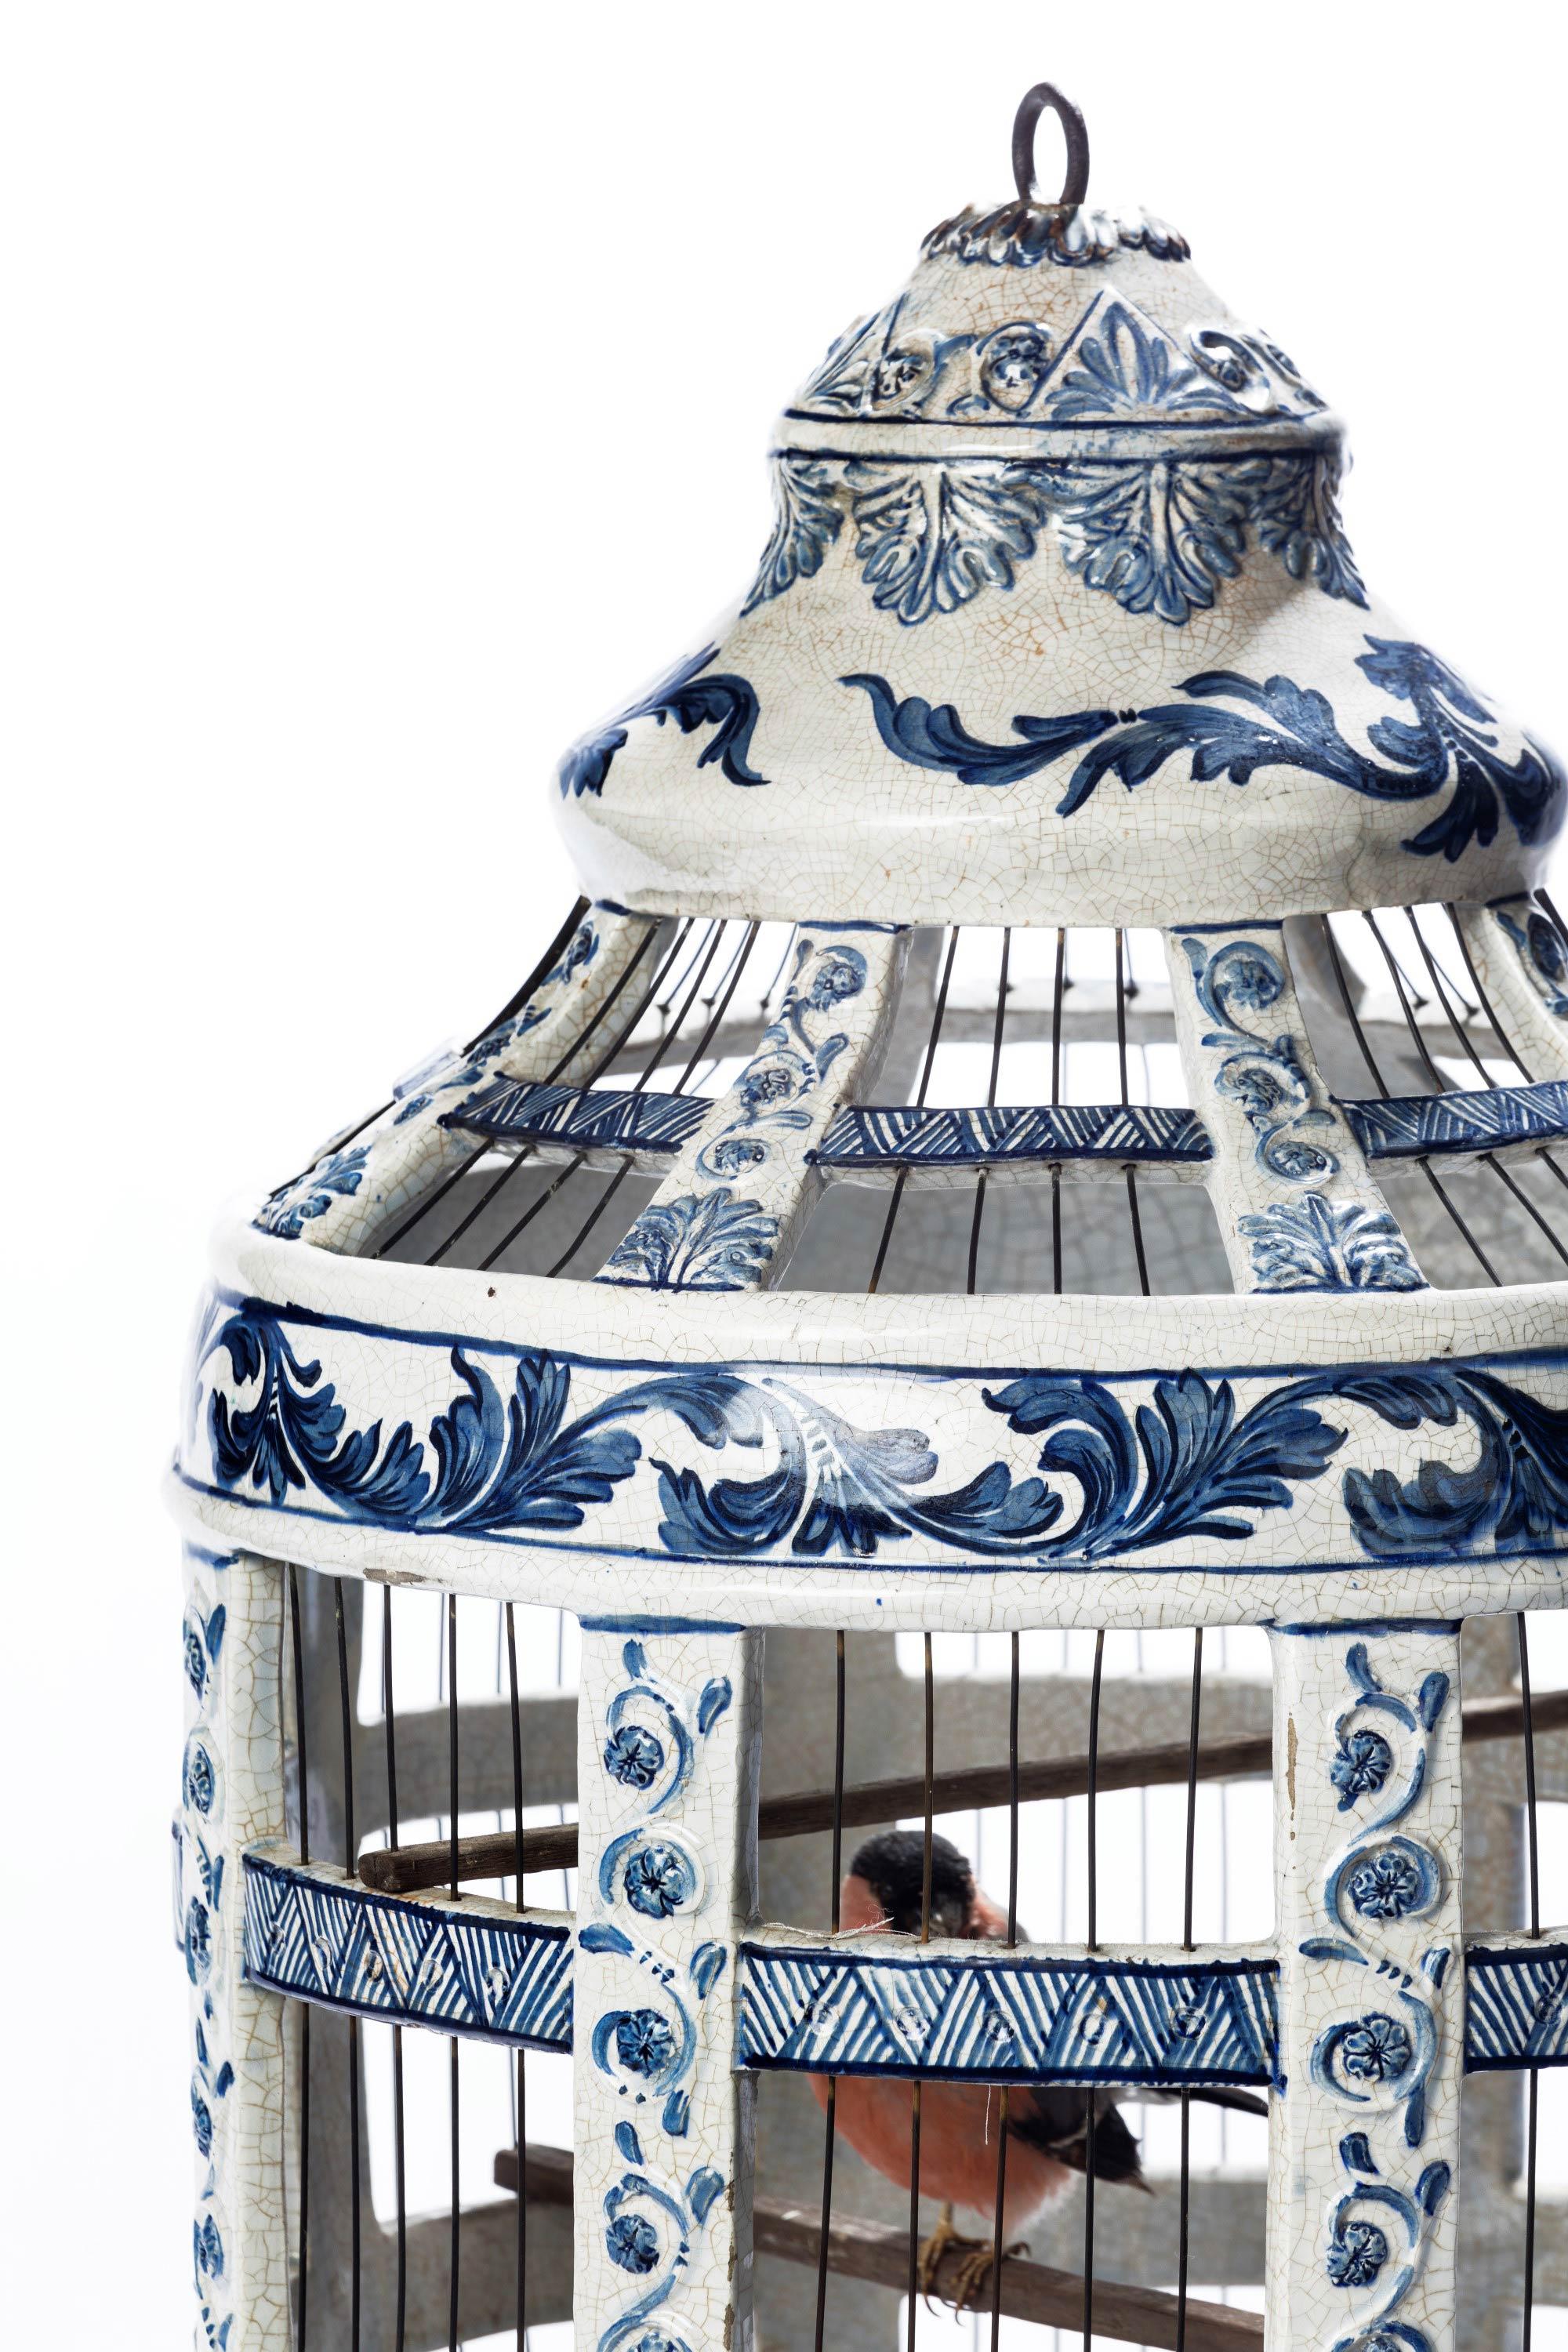 Extremely Rare 18th Century Dutch, Delft, Blue and White Birdcage In Good Condition In Peterborough, Northamptonshire